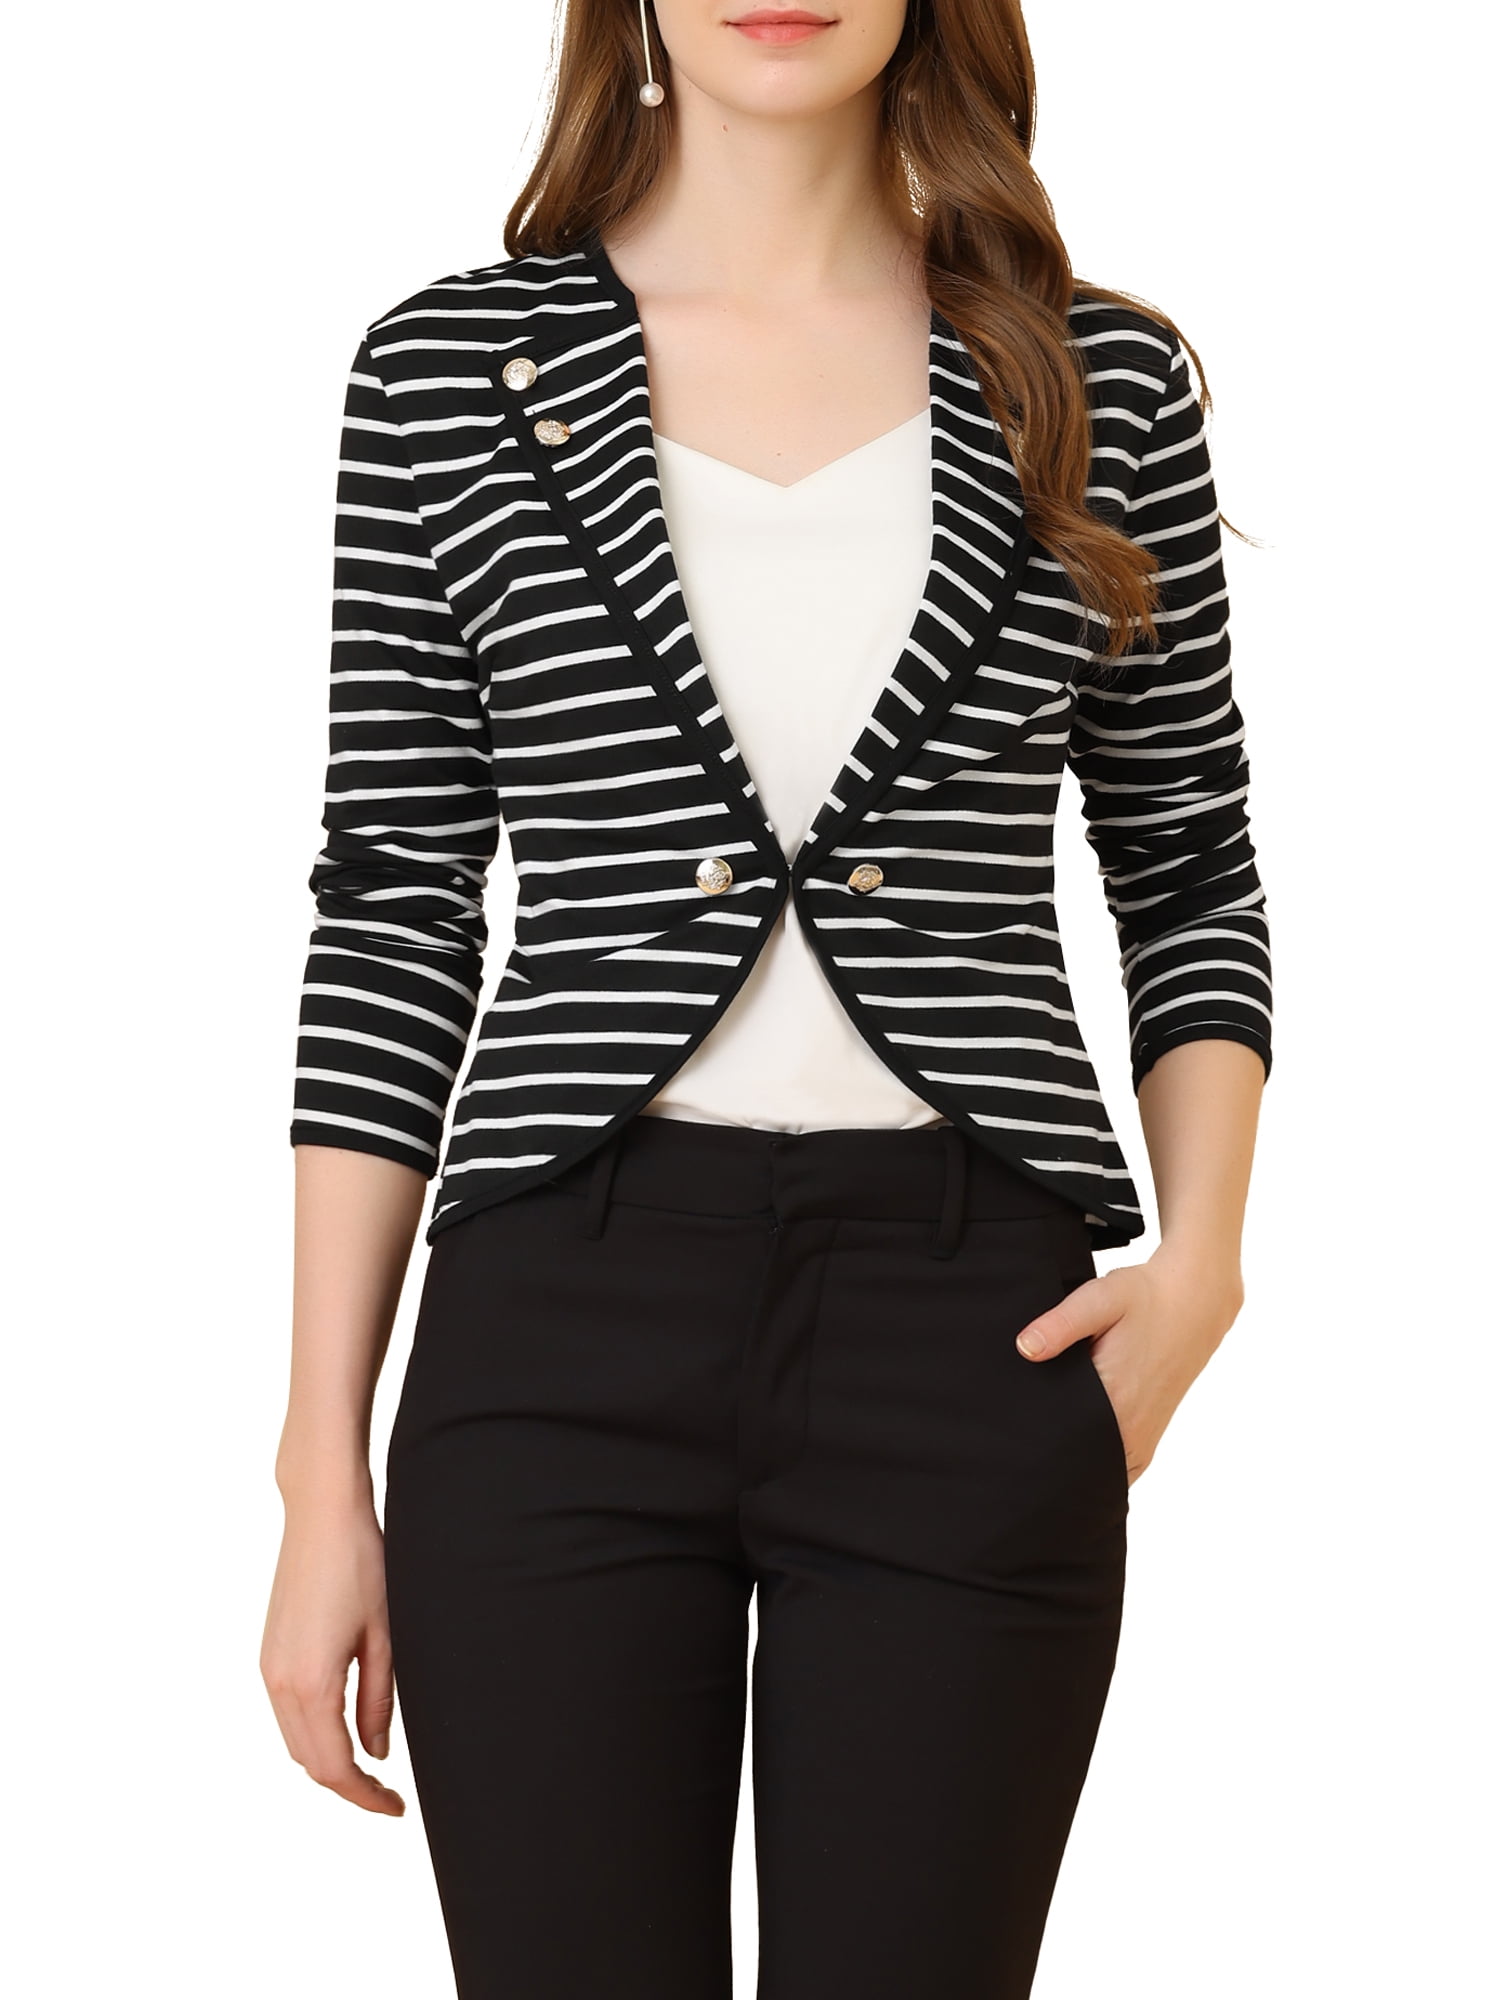 Tanming Womens Casual Office Work Suit Notch Lapel Mid Long Striped Jacket Blazer 